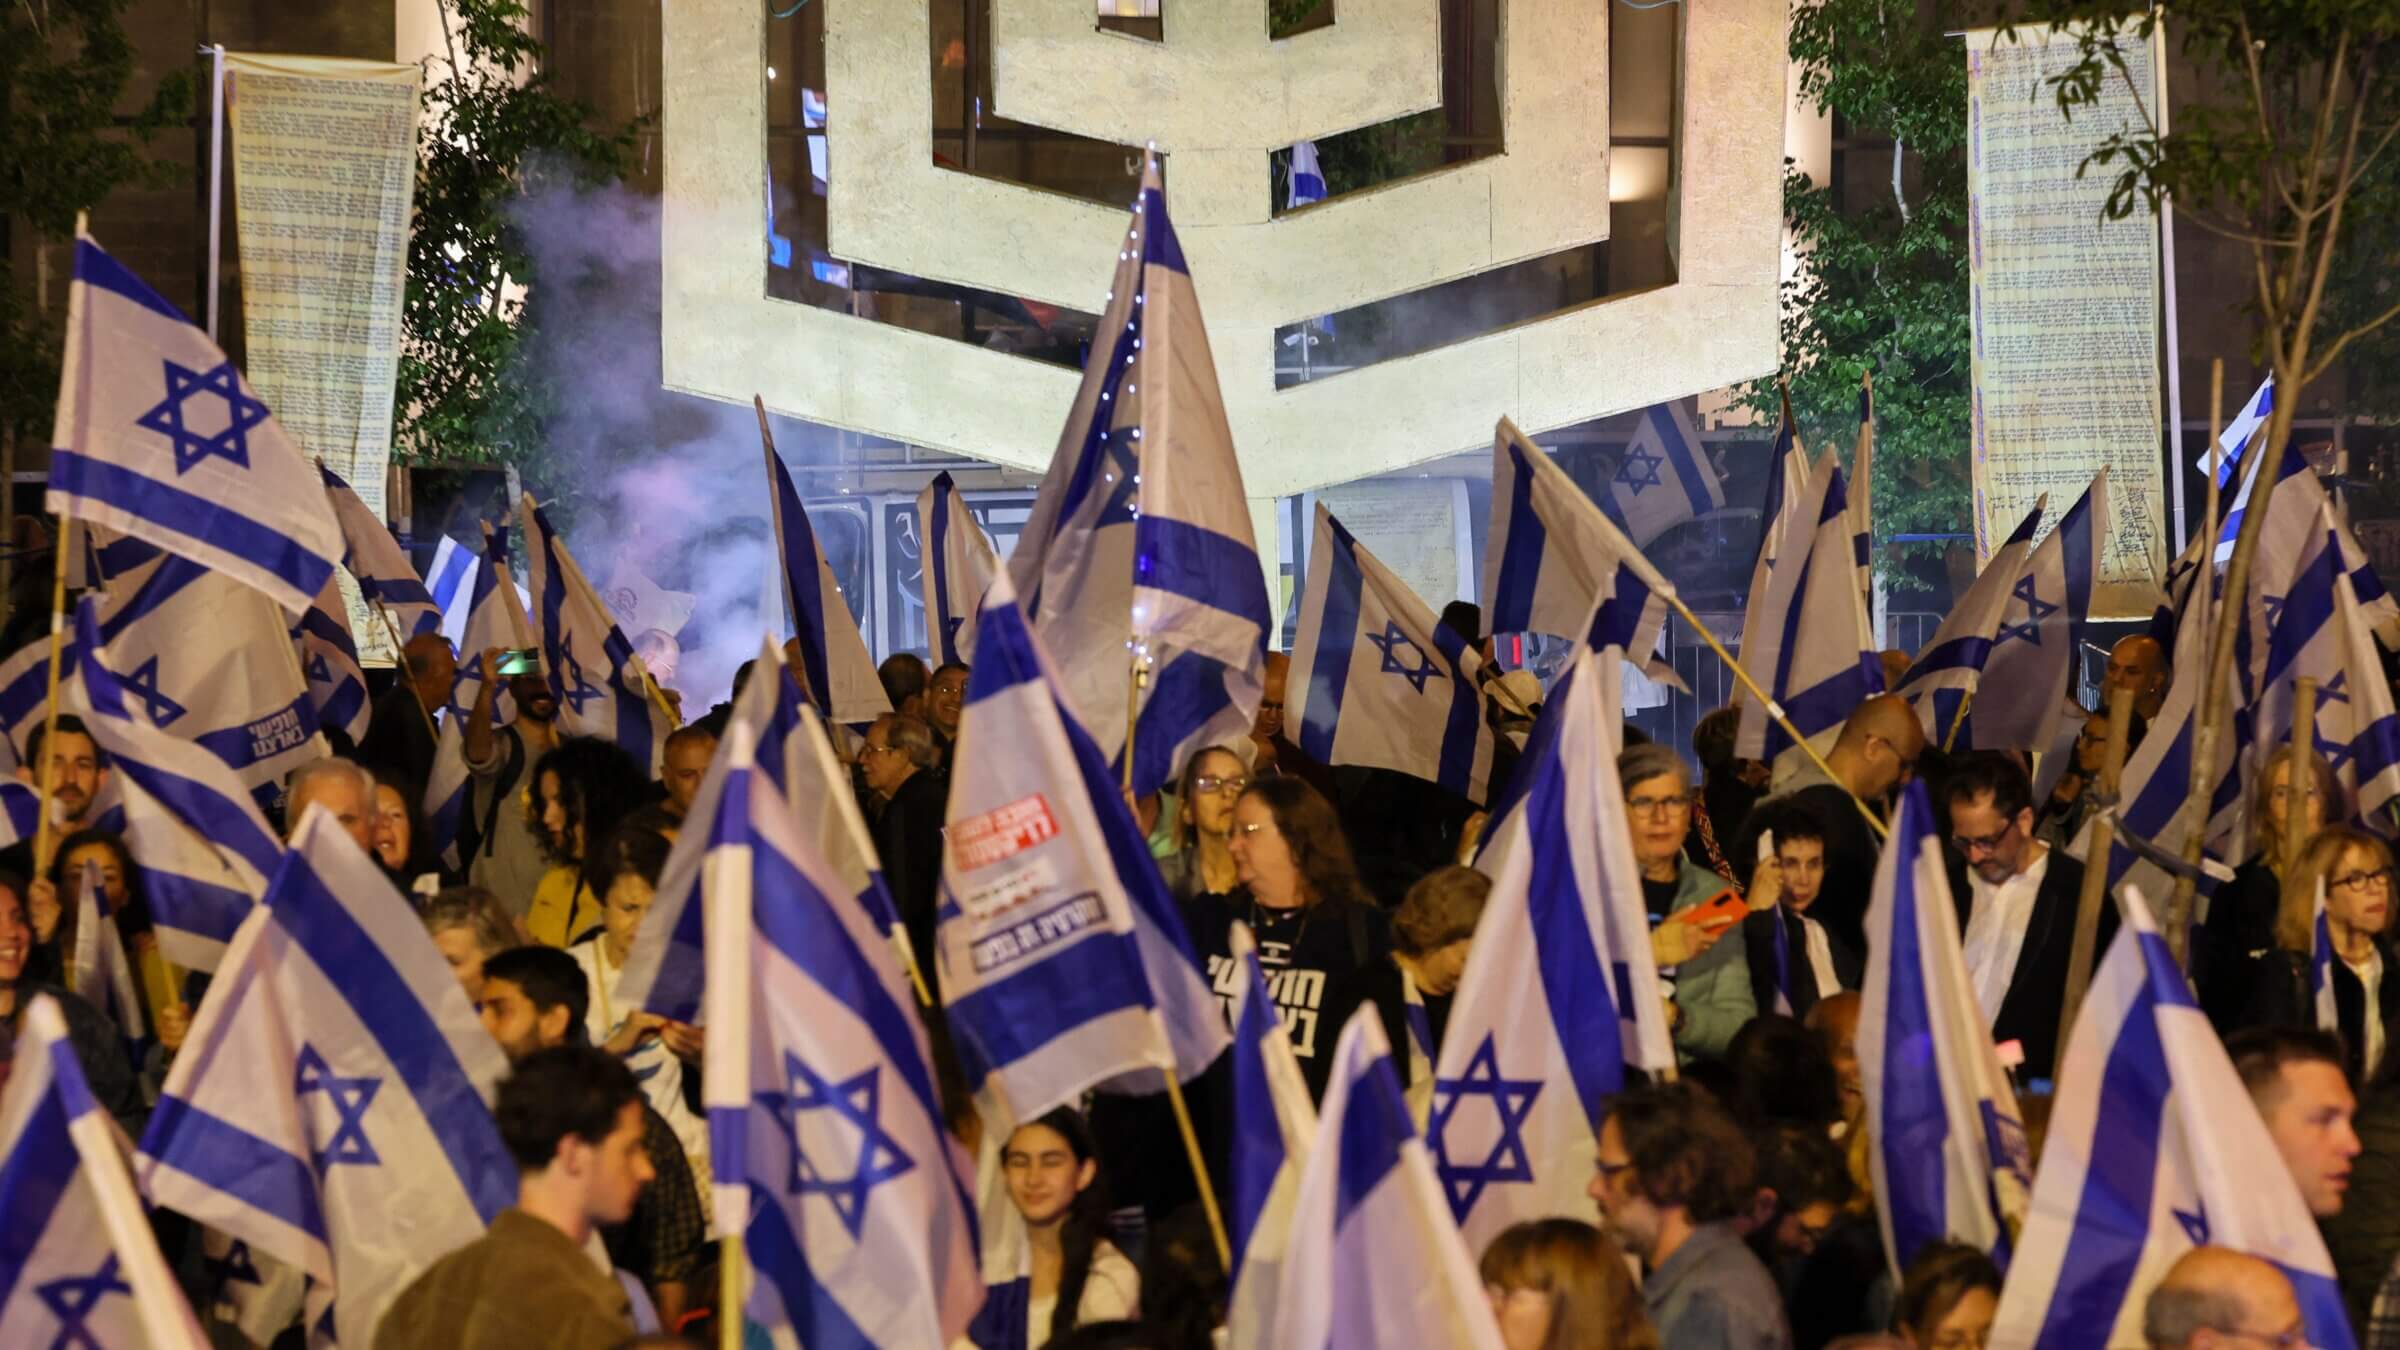 Demonstrators lifting national flags rally in Tel Aviv to protest the Israeli government's judicial overhaul bill, as the country begins celebrations for its 75th anniversary.